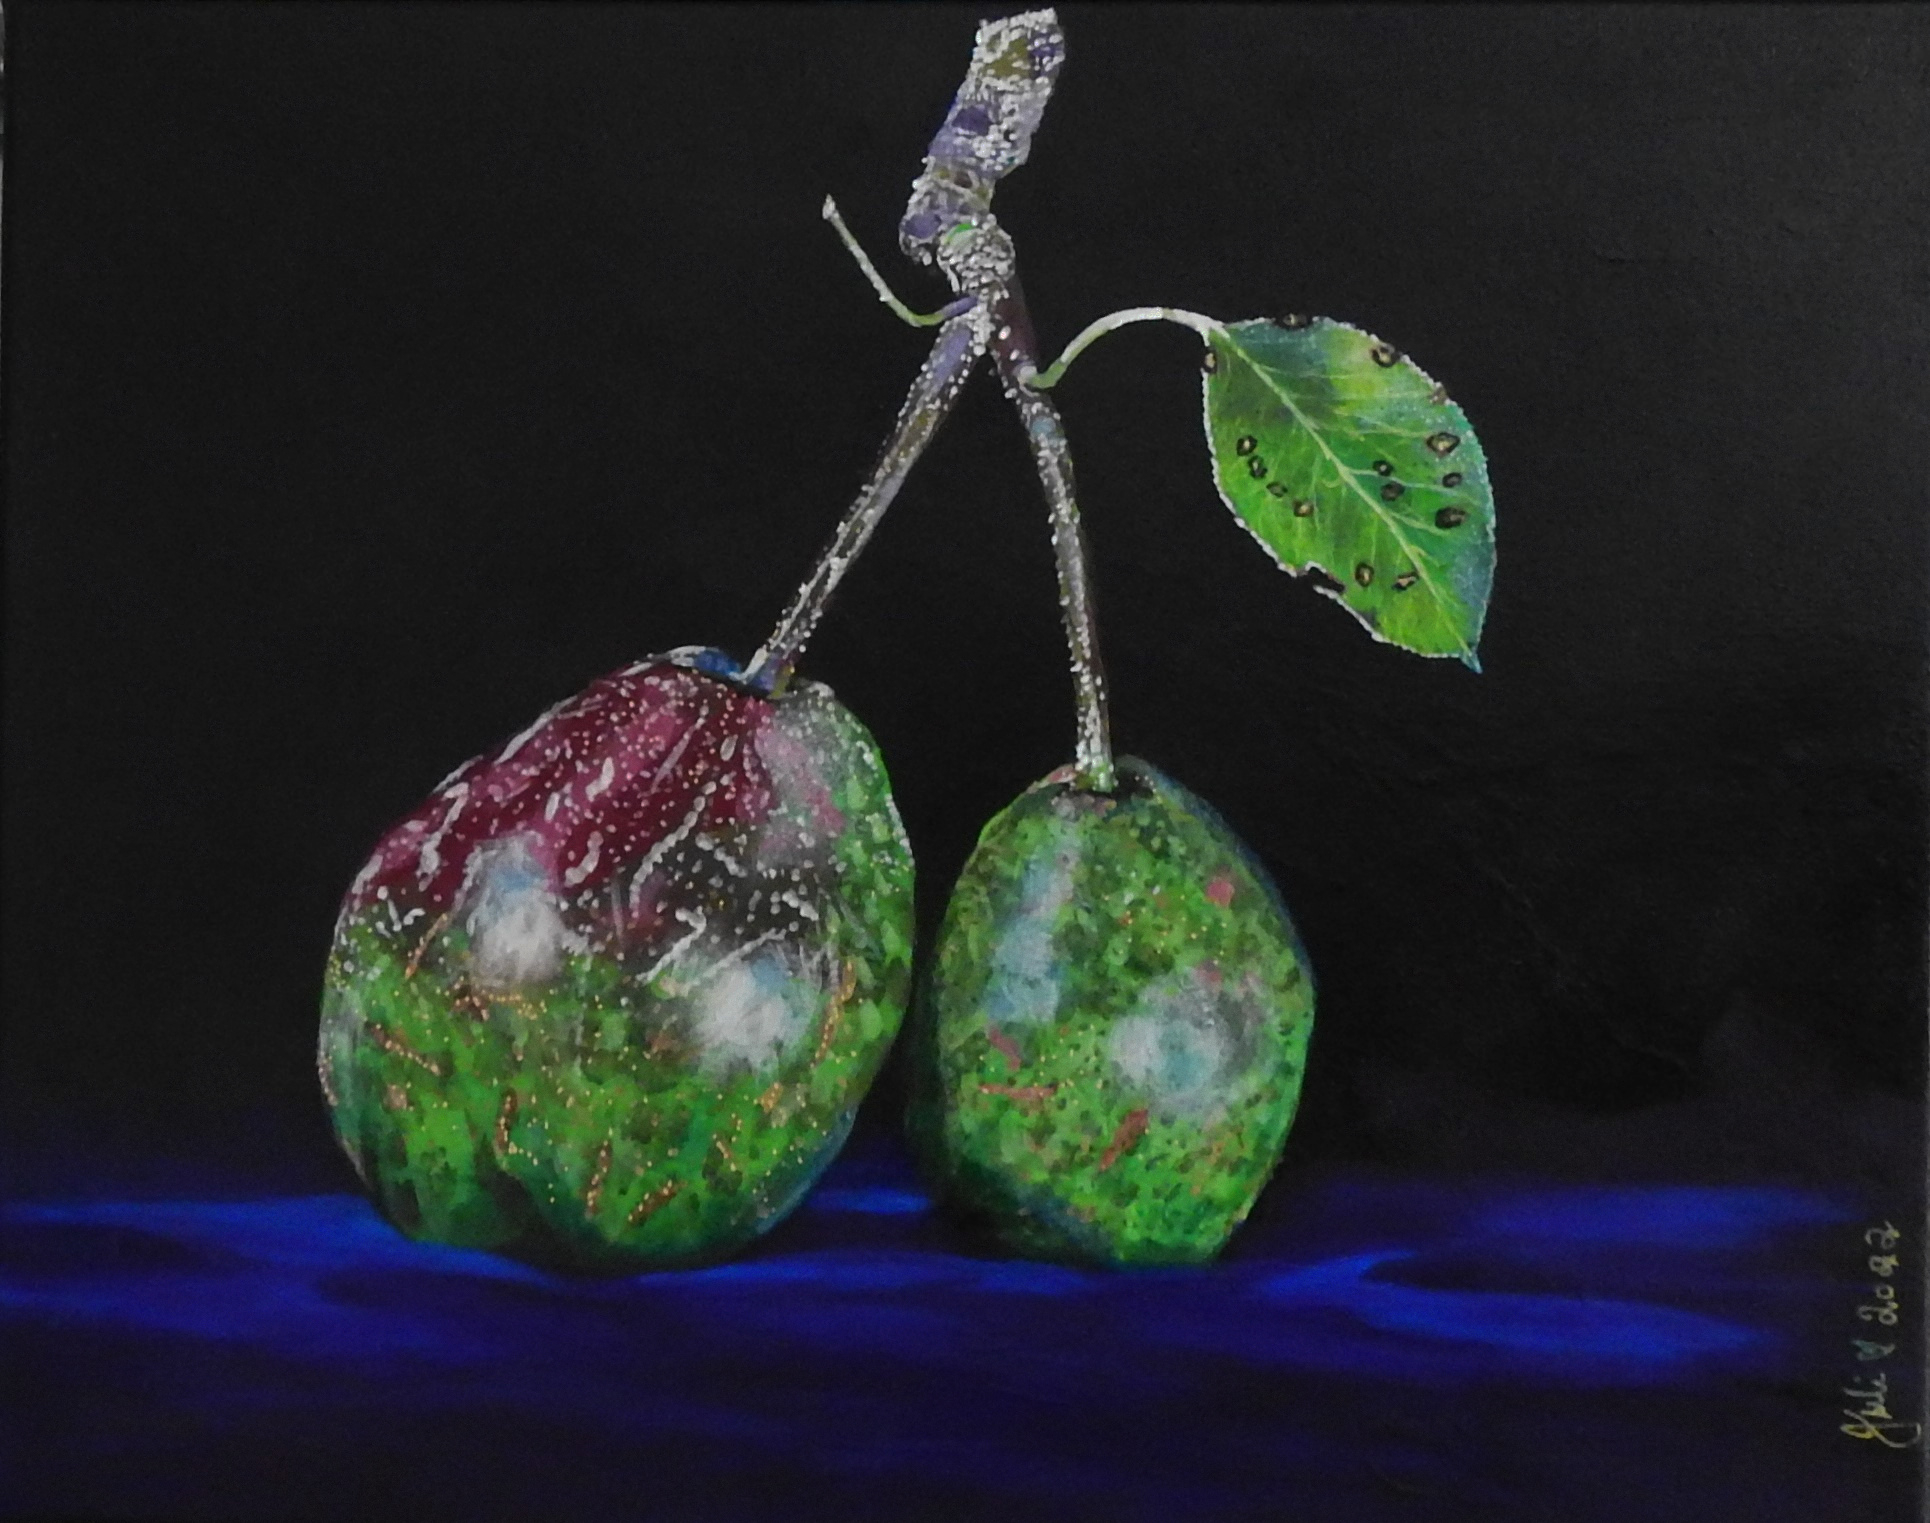 Fruit from the Old Pear Tree by Julie Hollis | Lethbridge 20000 2022 Finalists | Lethbridge Gallery